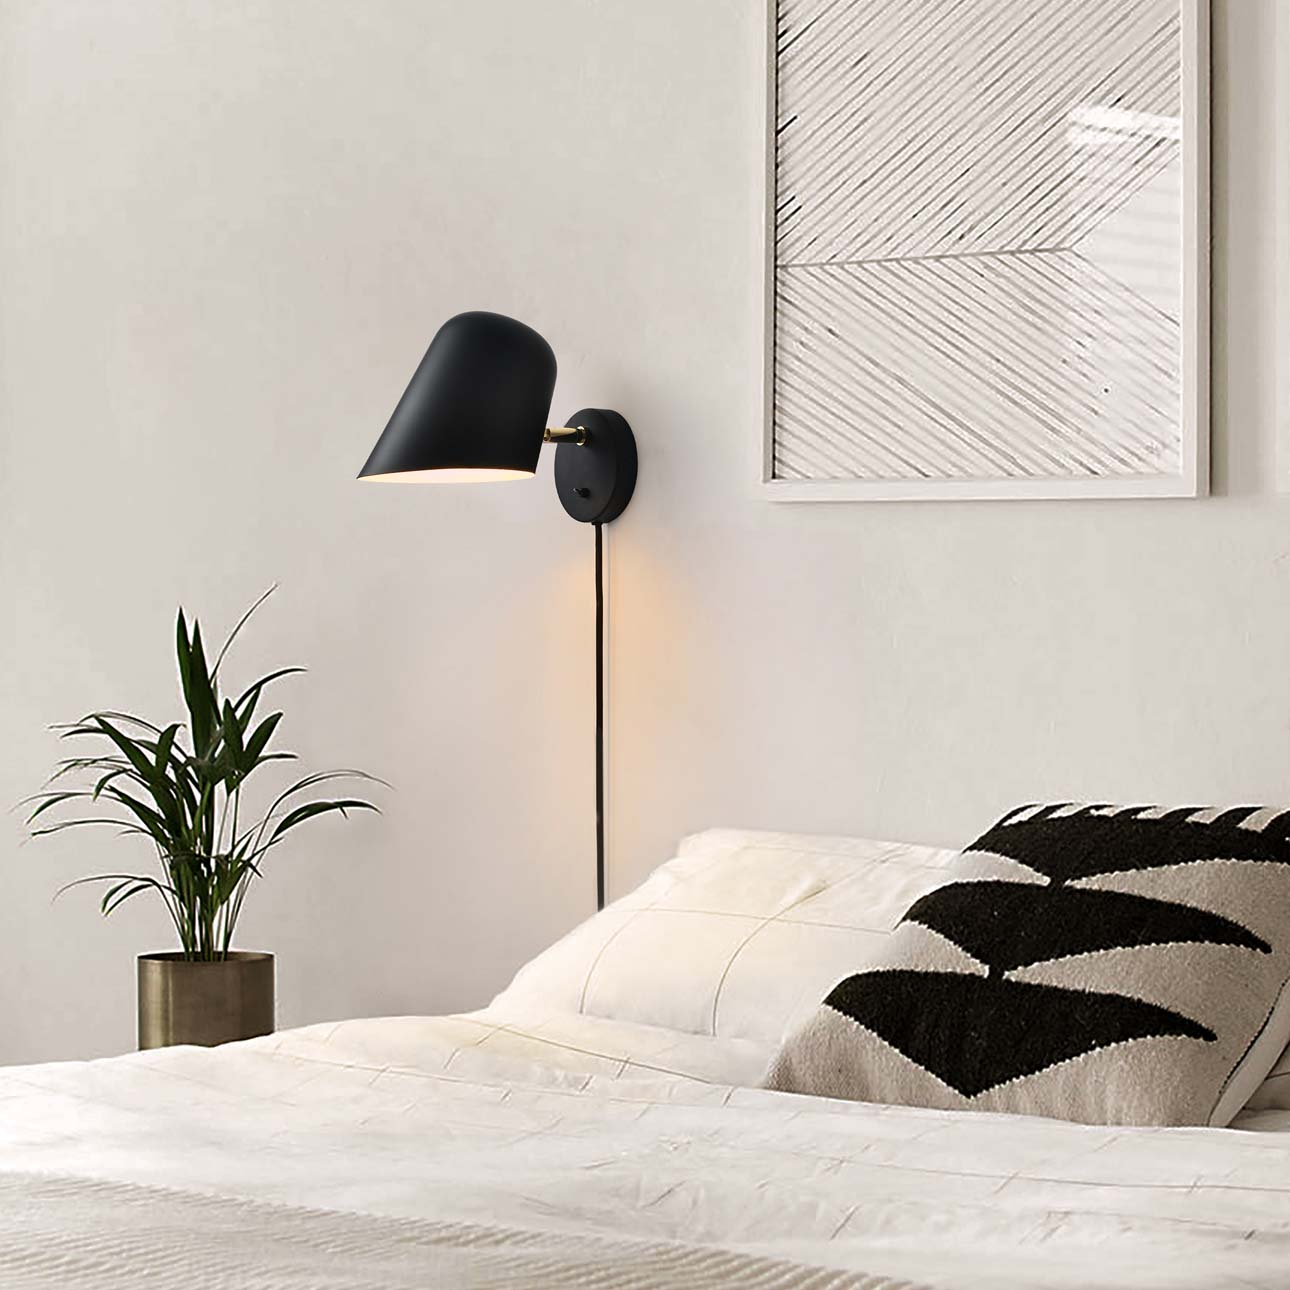 Chic Culver Wall Sconce in Matte Black: Adjustable shade for focused lighting. Glare-free LED illumination. Modern and versatile design by Nova of California